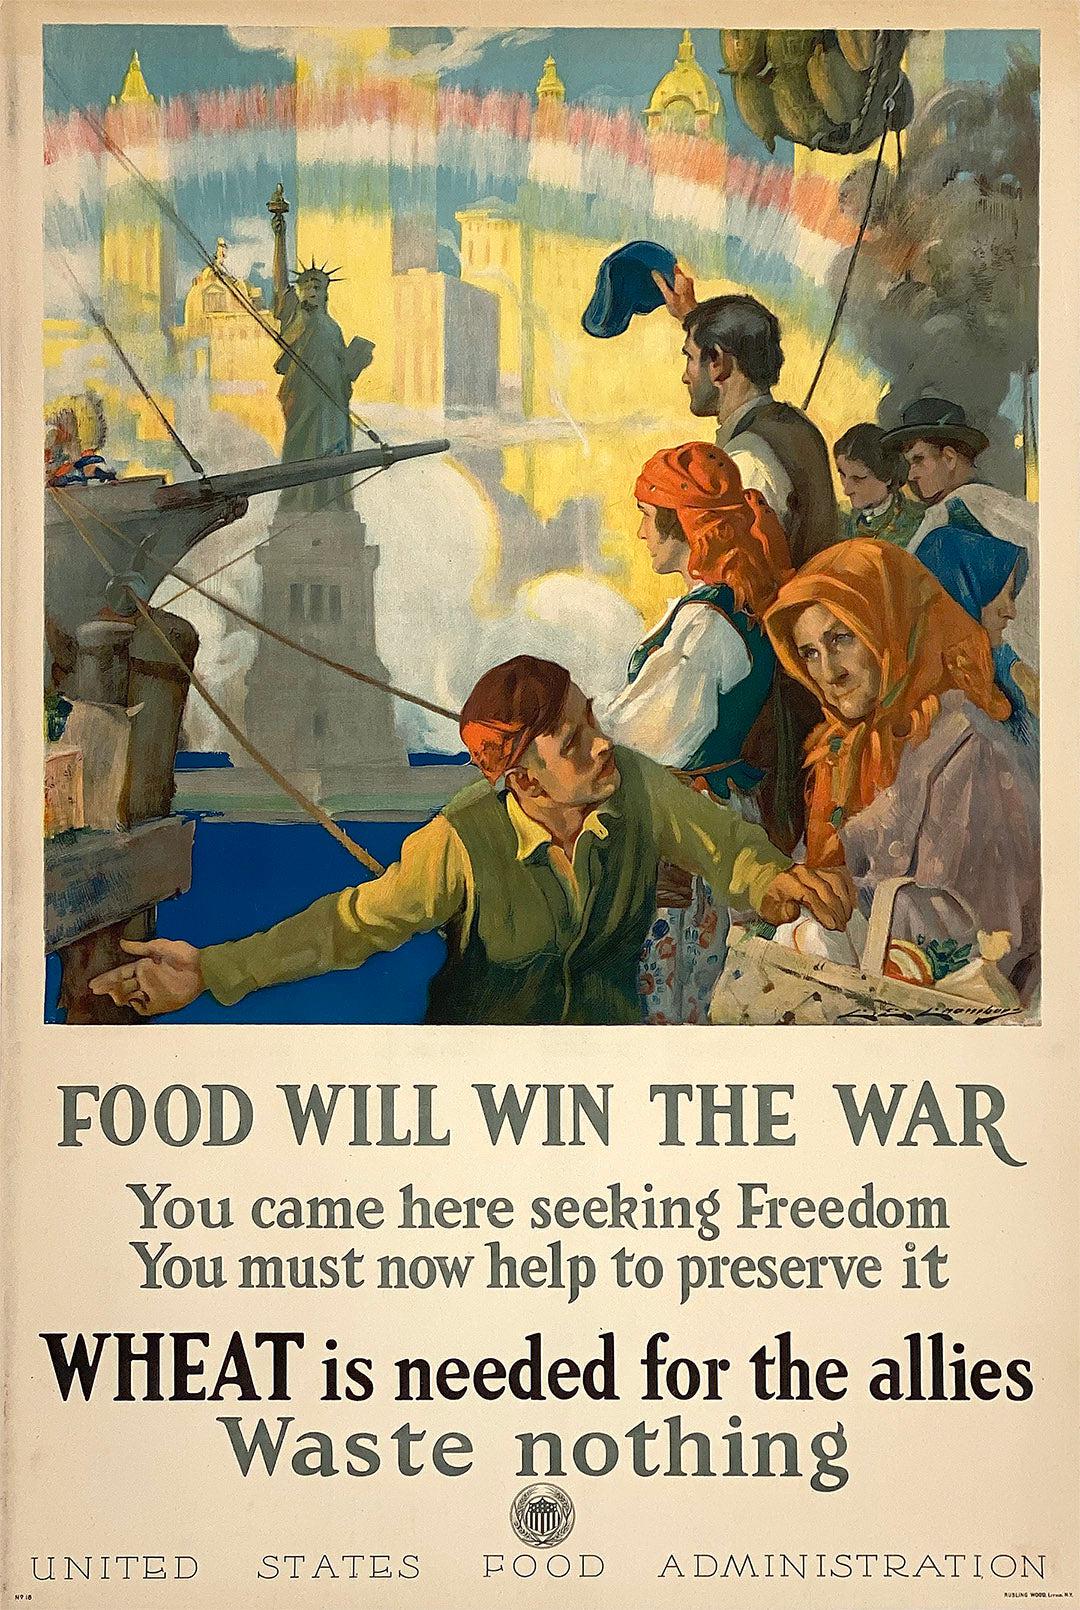 Original Vintage WWI Food will Win the War Poster by Chambers c1917 Statue of Liberty